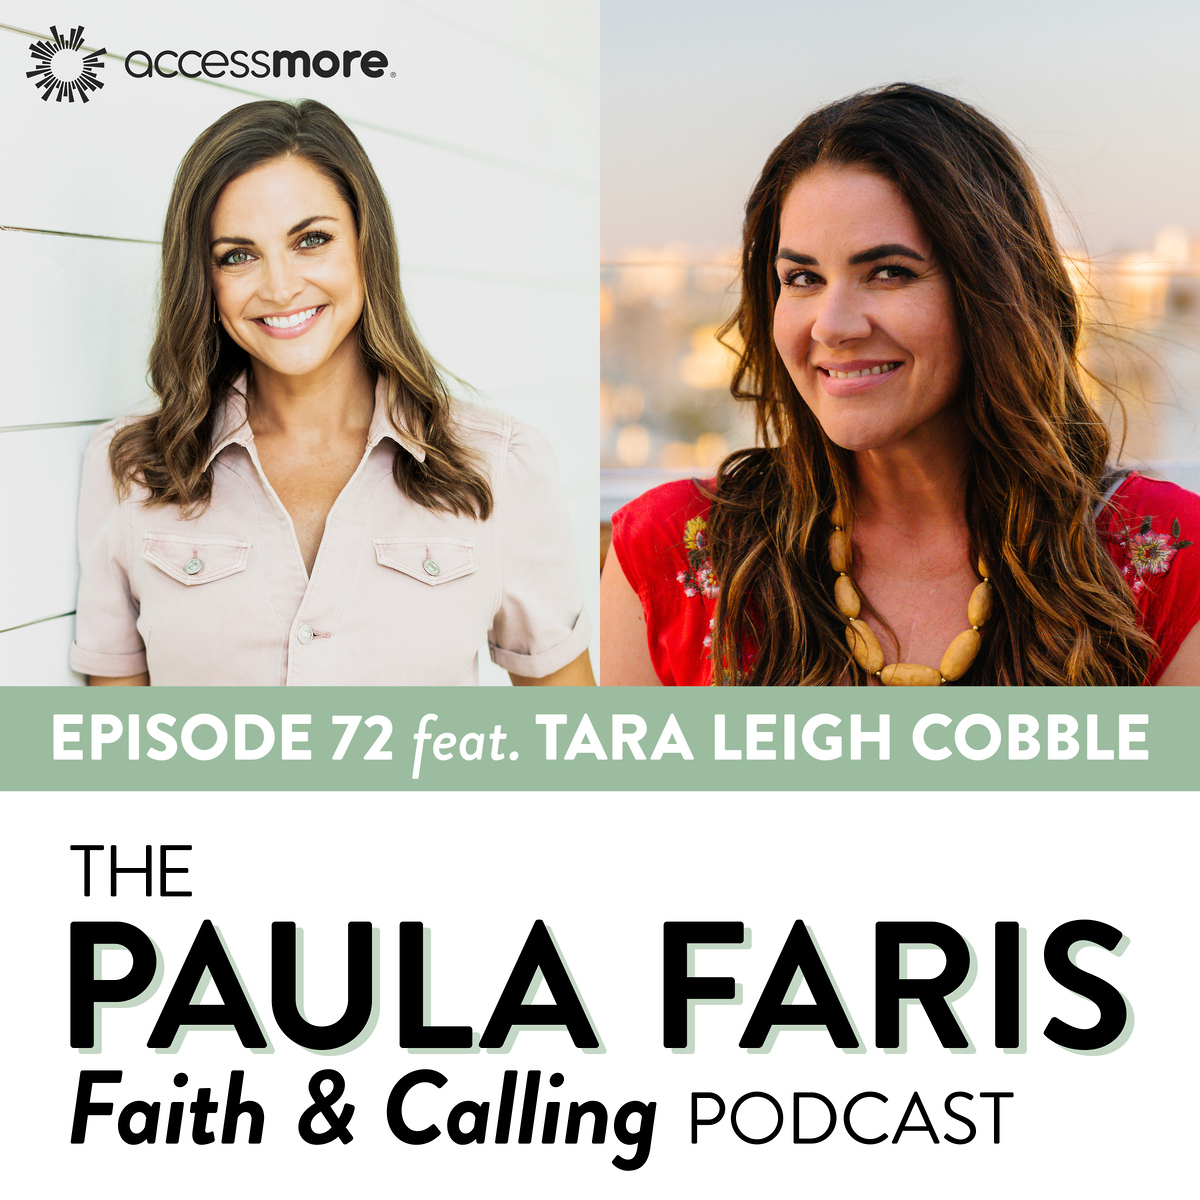 Ep 72 - Tara Leigh Cobble: Navigating Change, Overcoming Intimidation, and Why Your Talent Doesn't Always = Your Calling